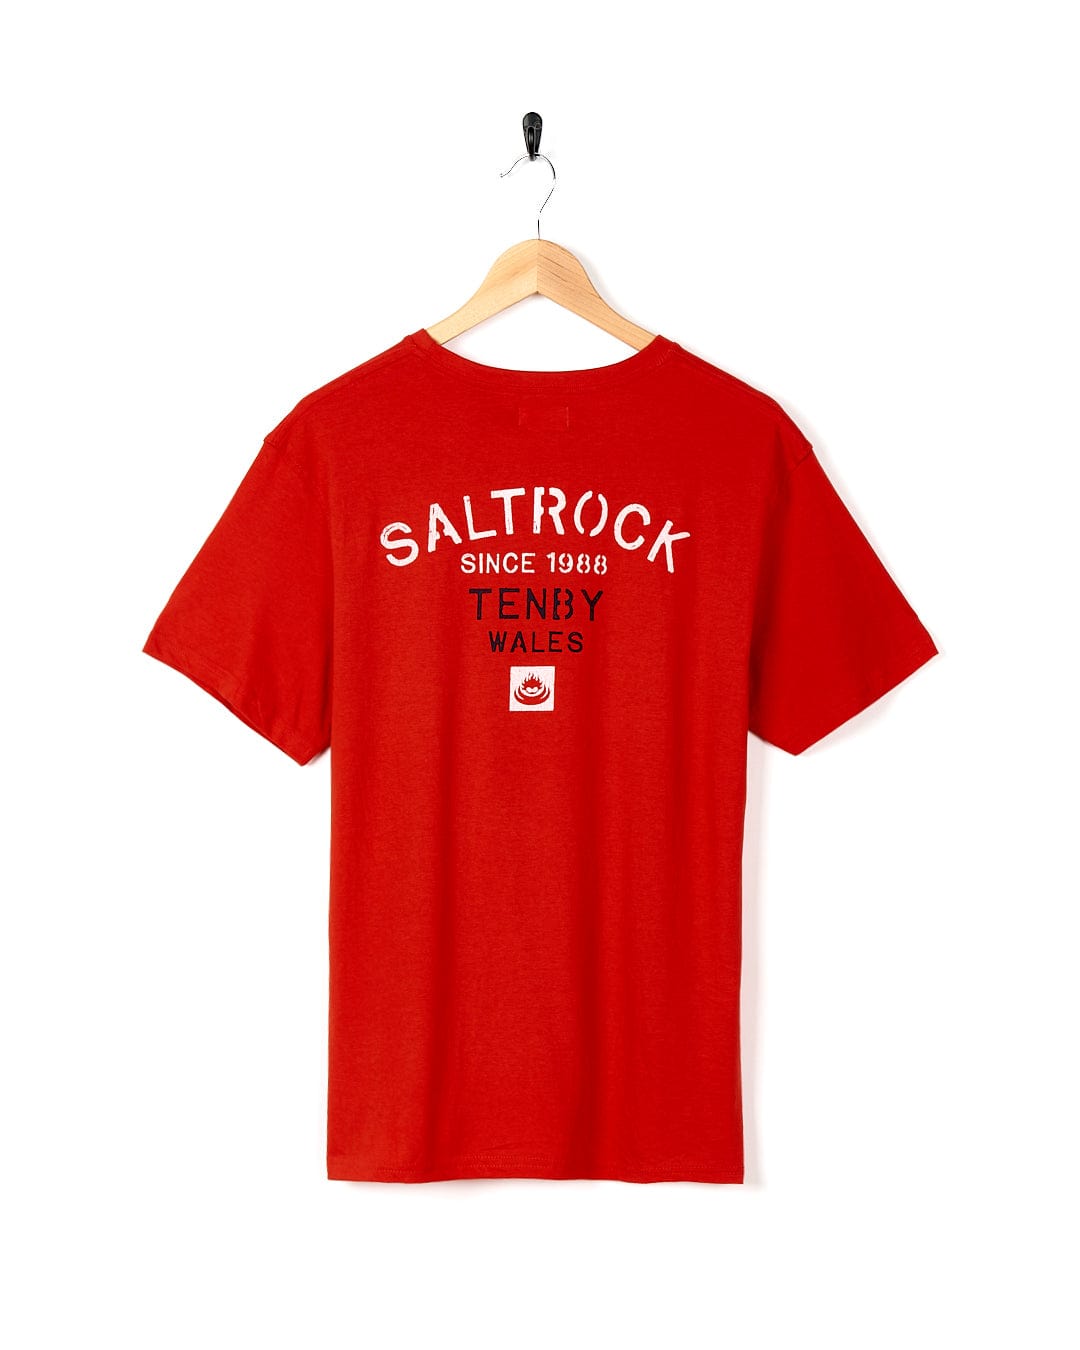 A Stencil - Mens Location T-Shirt - Tenby - Red with the brand name Saltrock on it.